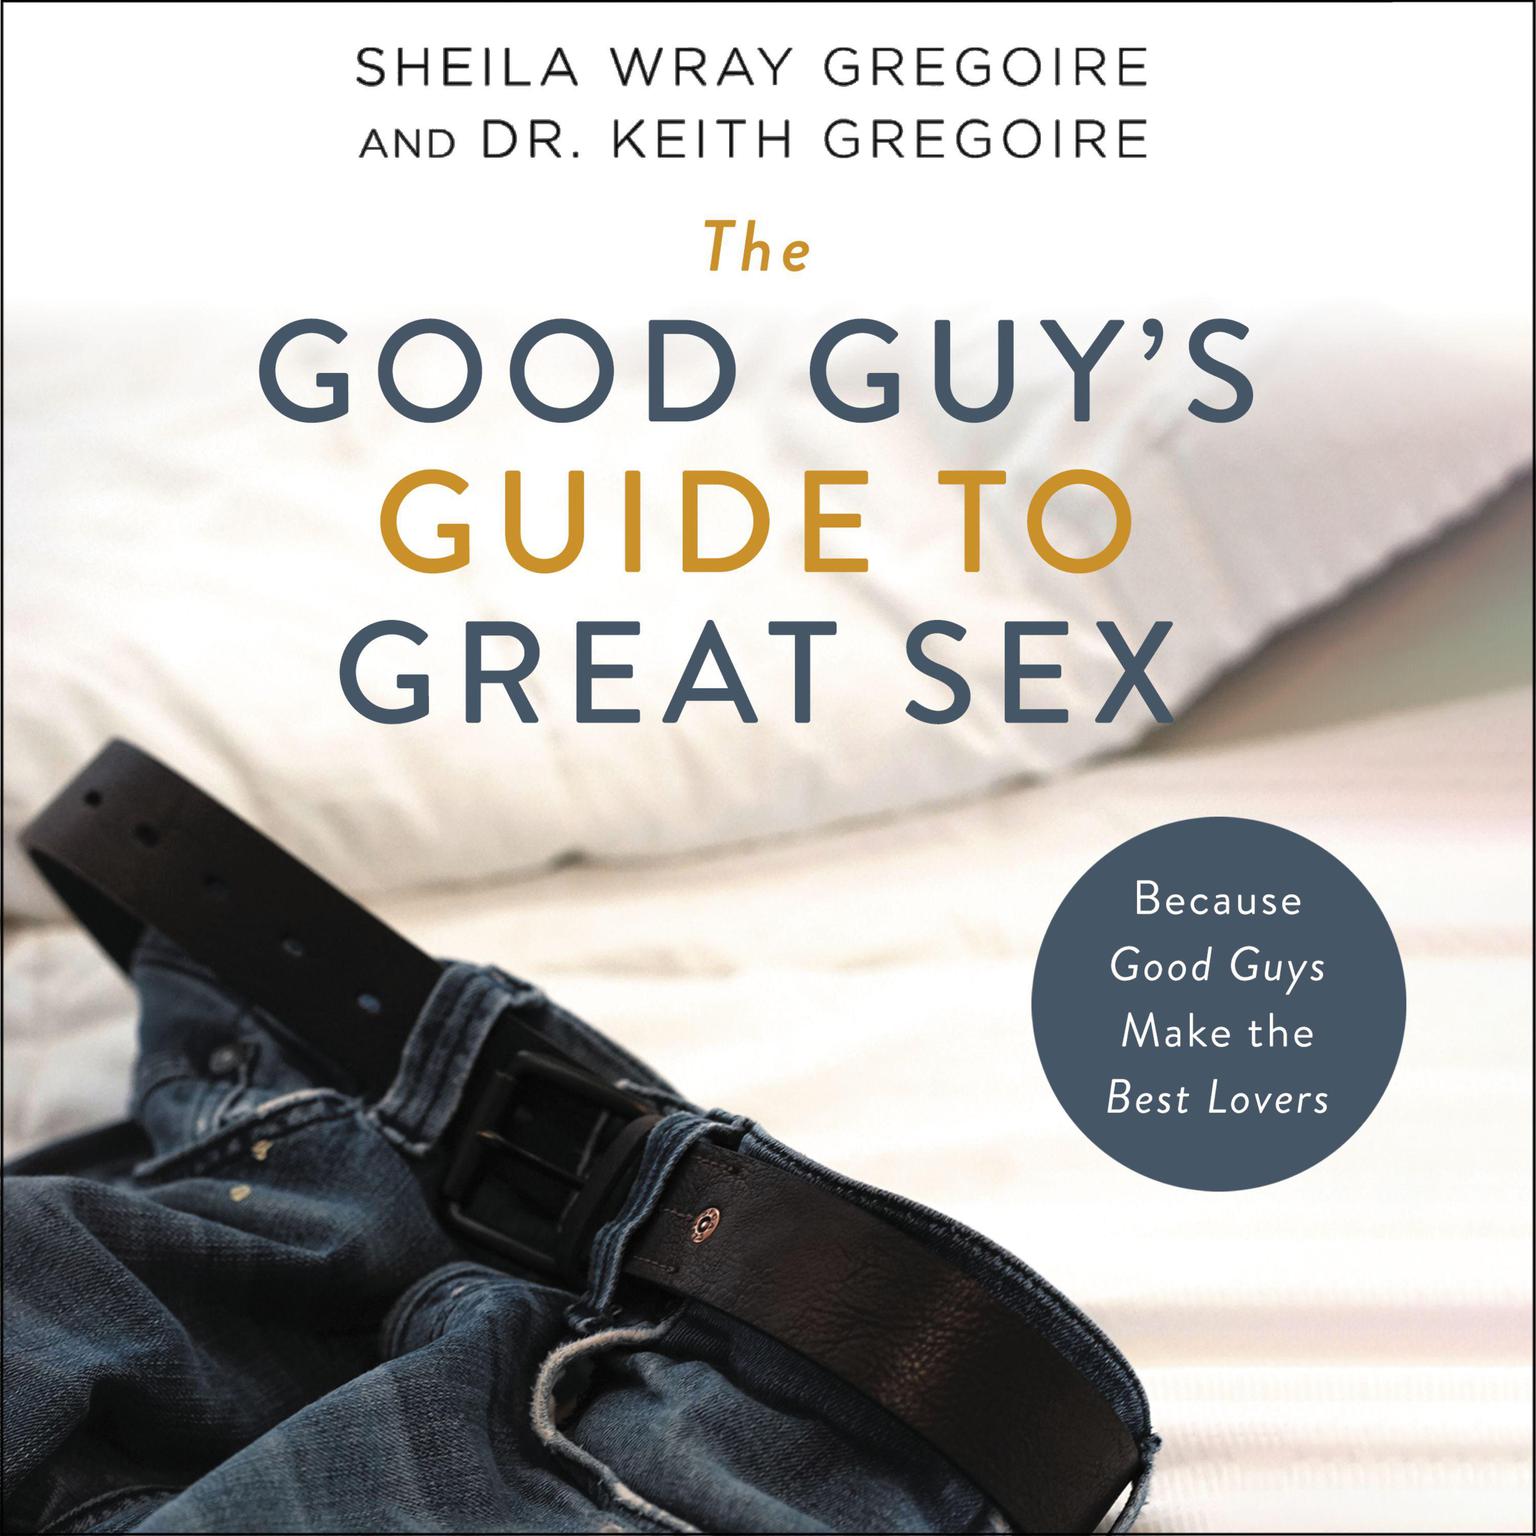 The Good Guys Guide to Great Sex: Because Good Guys Make the Best Lovers Audiobook, by Sheila Wray Gregoire